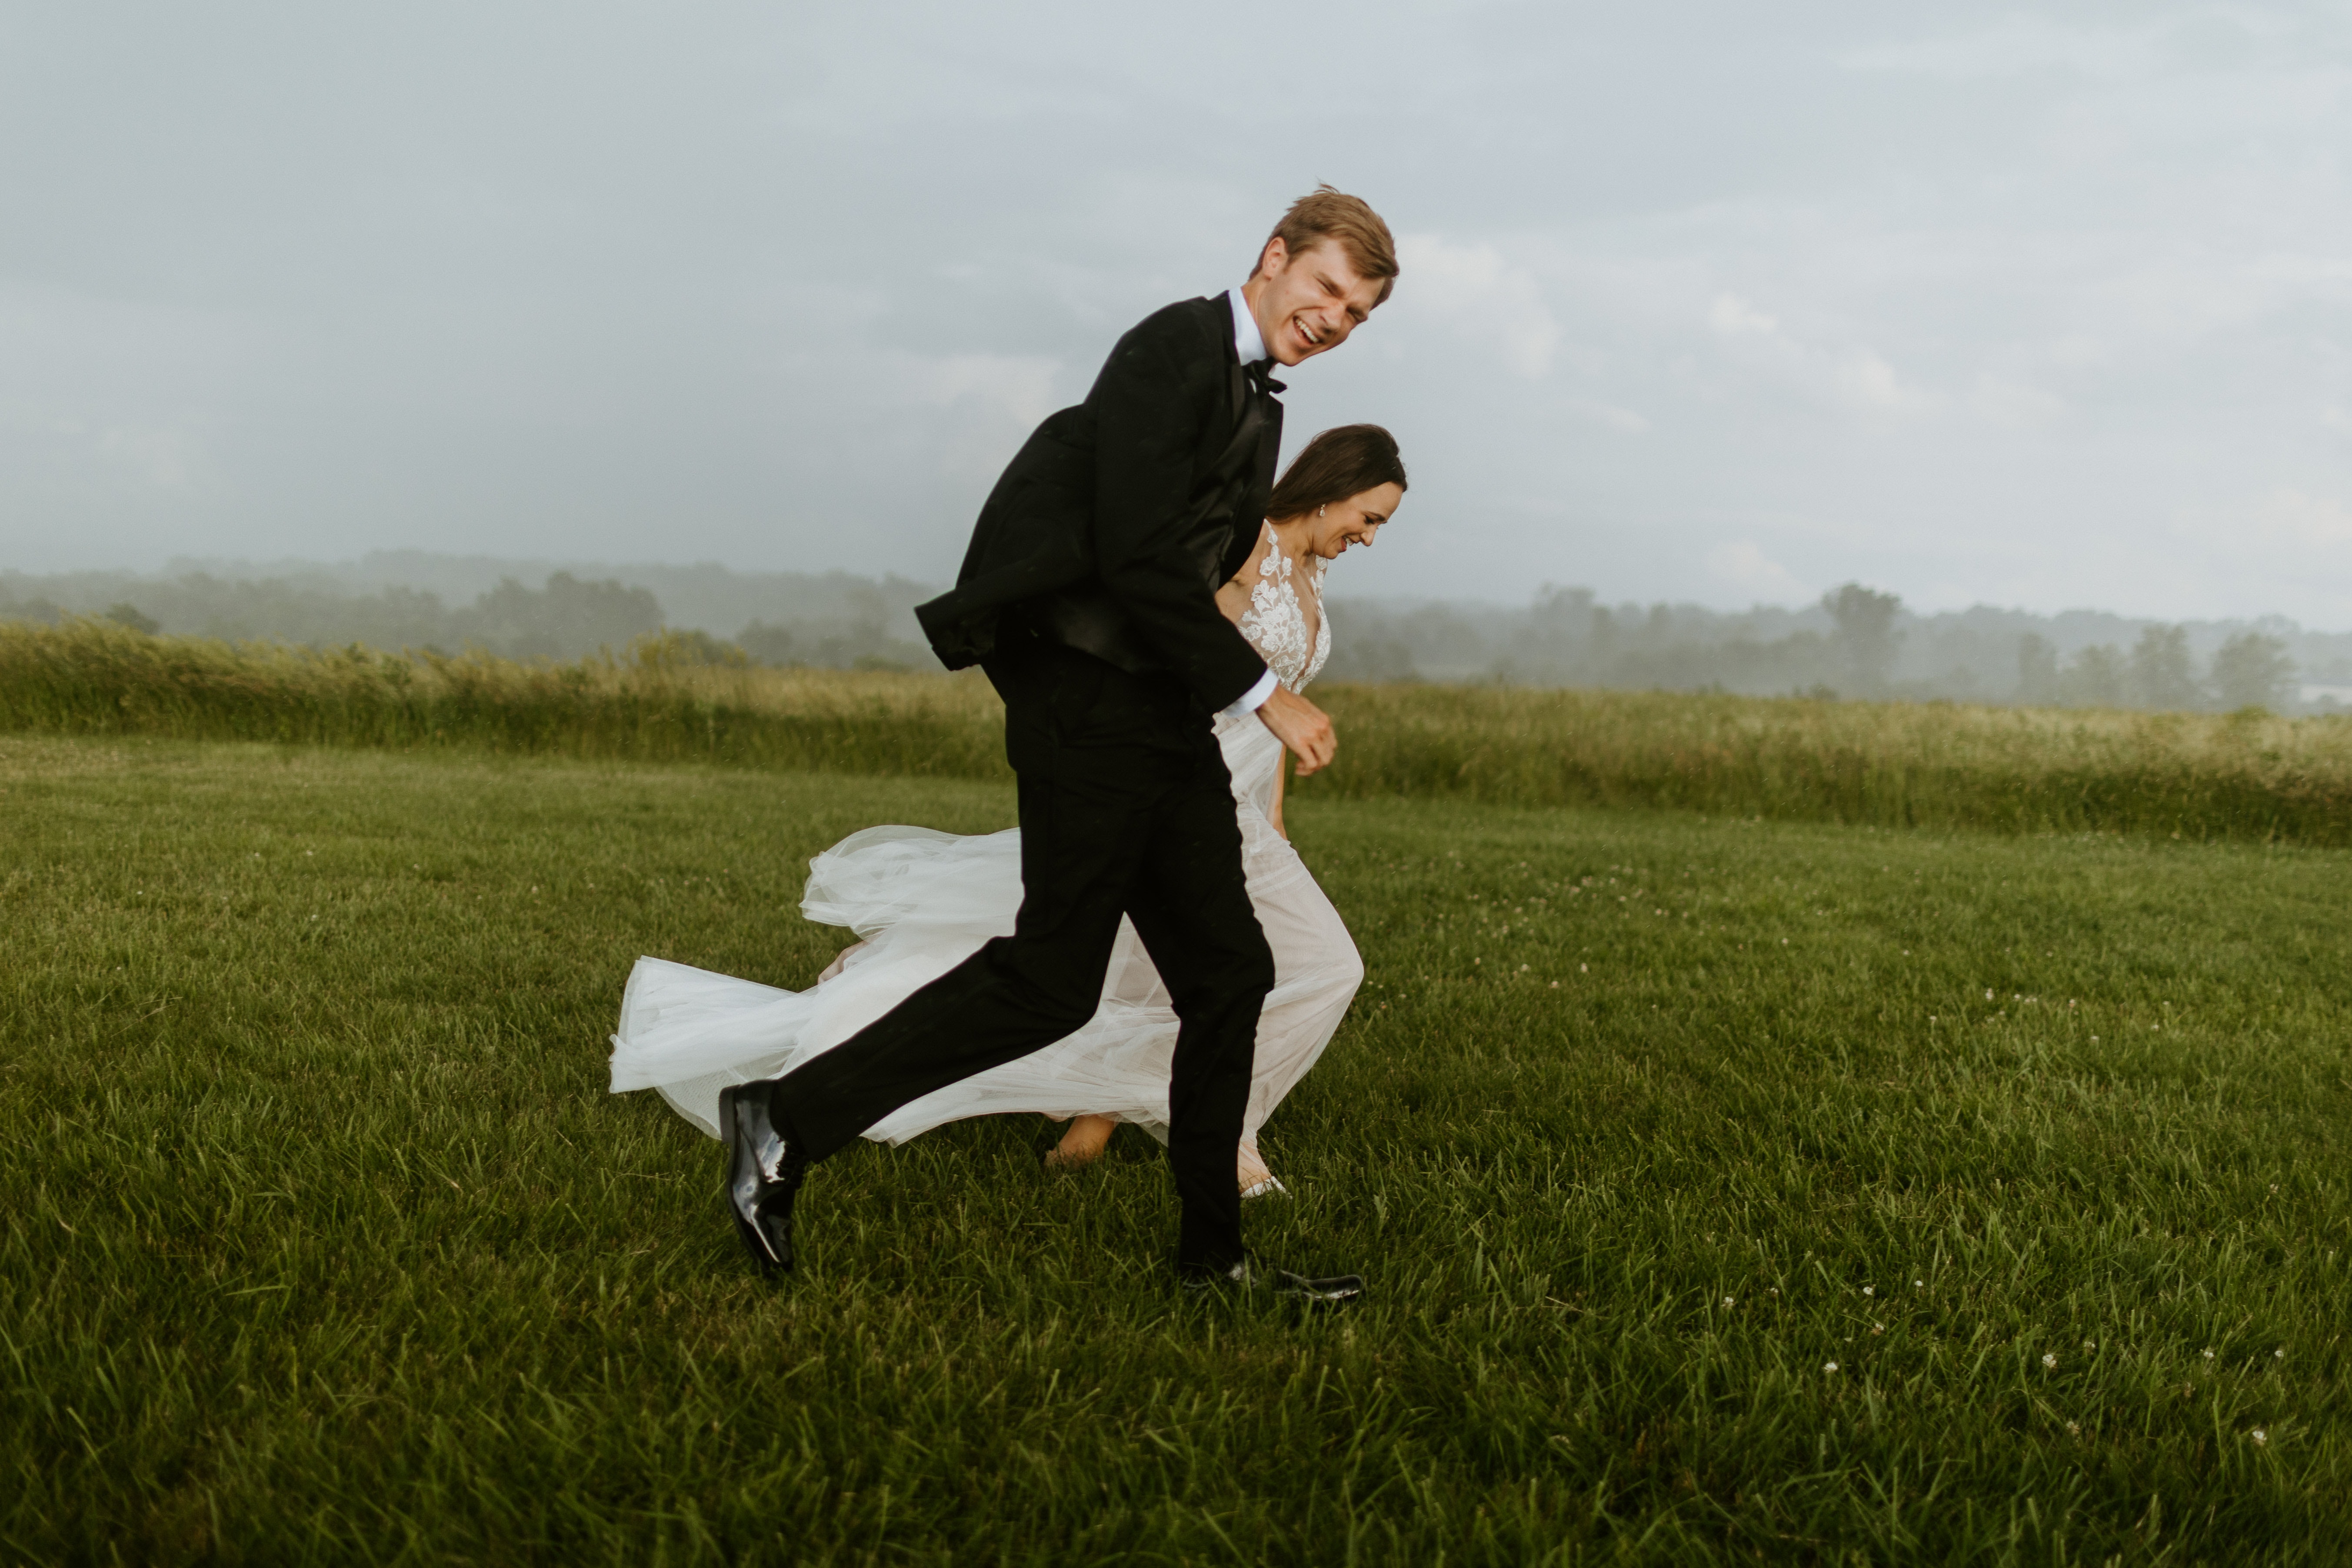 Newlyweds running together.  | Source: Pexels